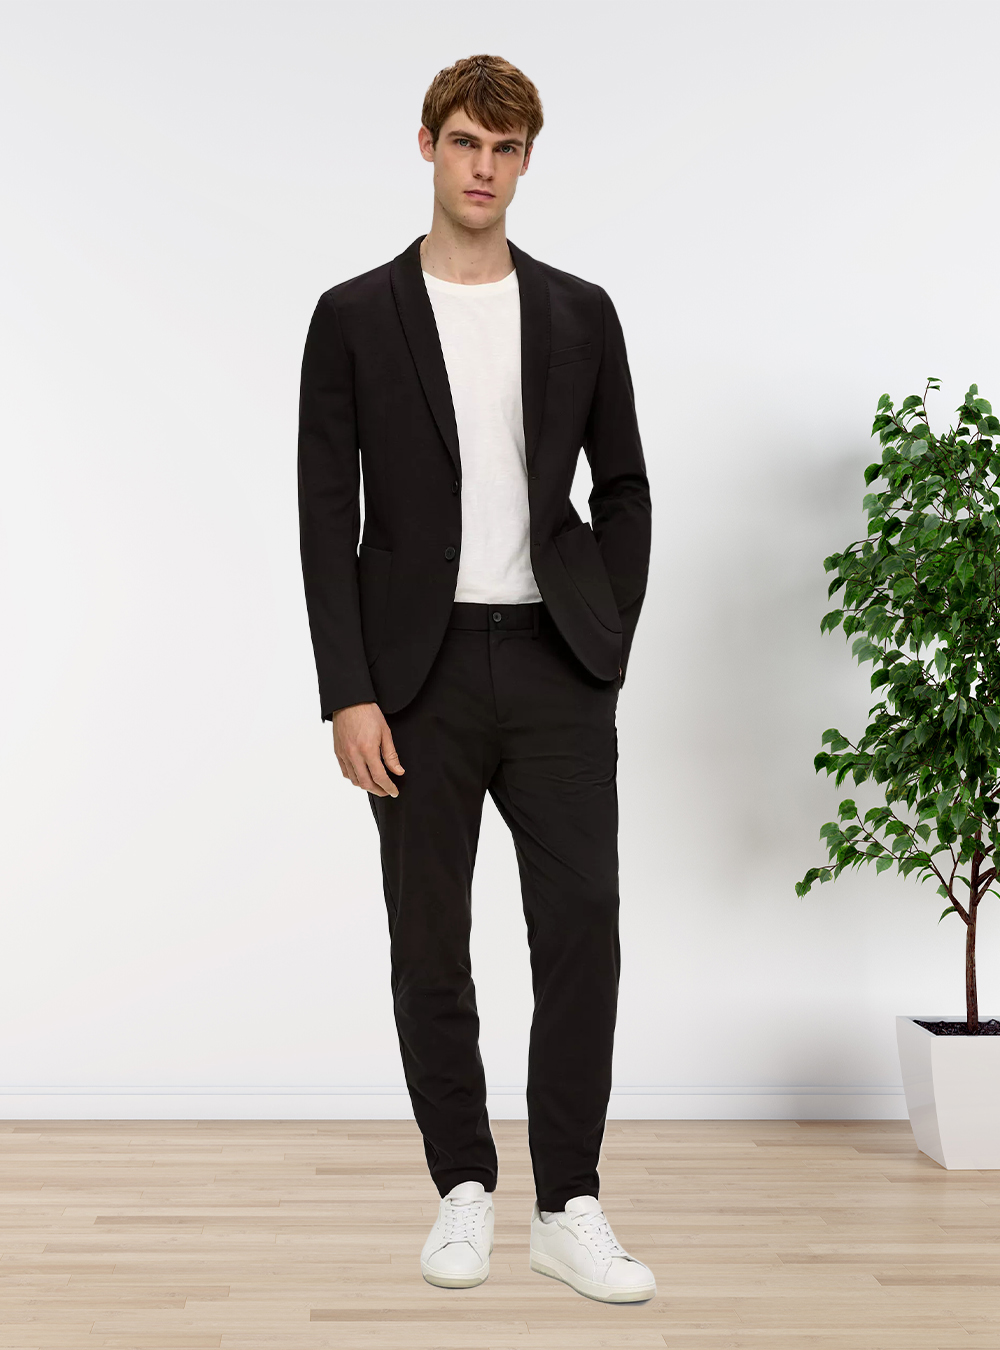 black suit, white crew-neck T-shirt, and white canvas sneakers